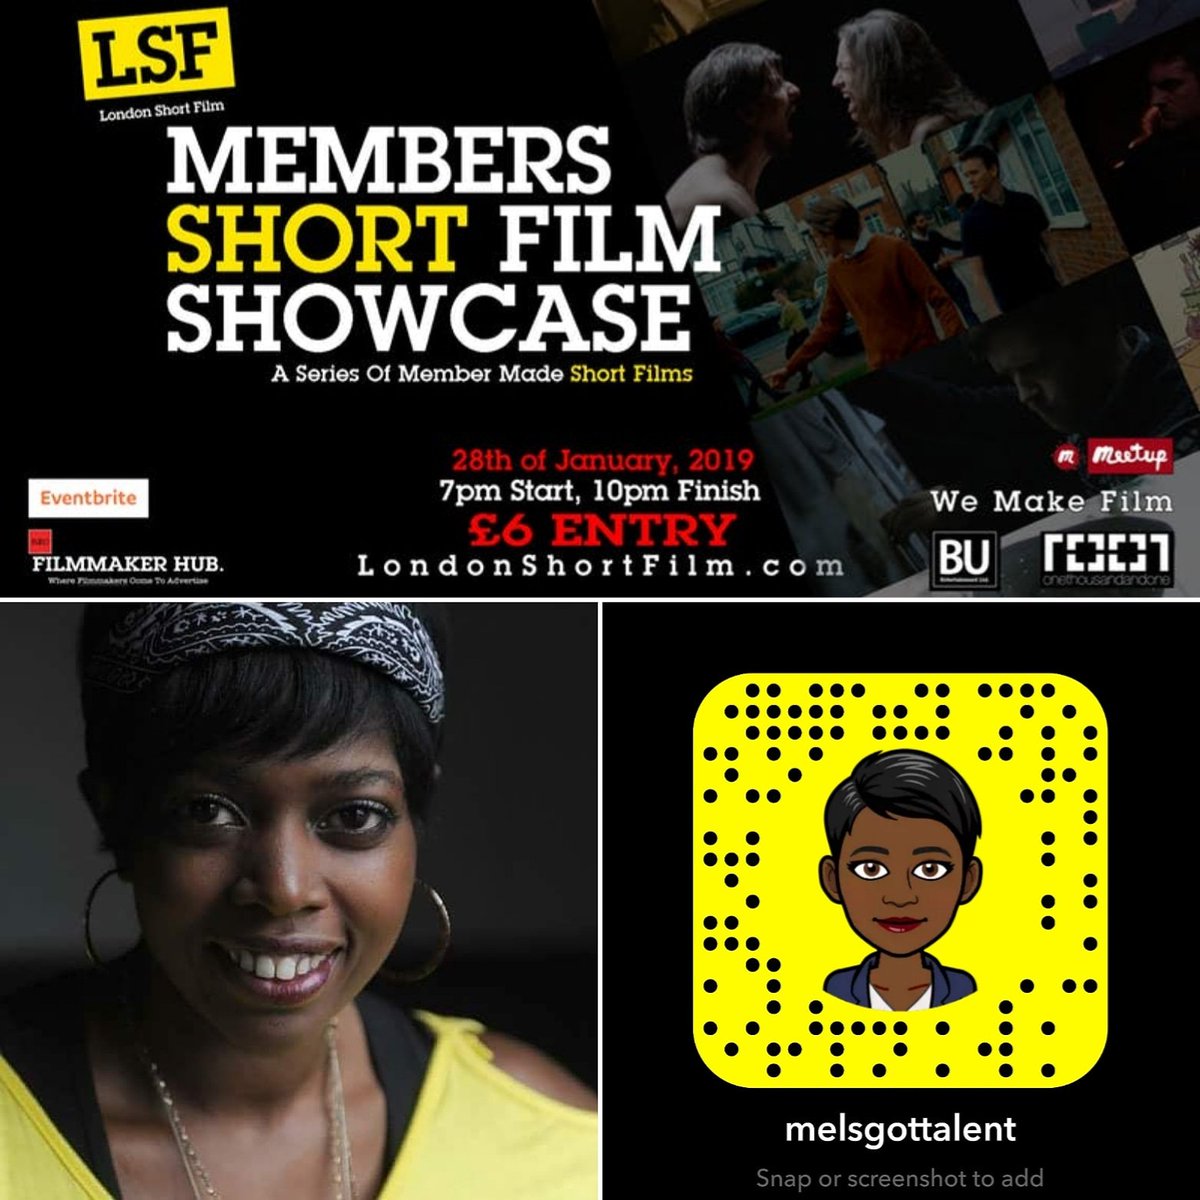 #happymonday TONIGHT looking forward to #host the #ShortFilm #screening showcase for @LondonShortFilm  #hostesswiththemostess

Doing some #BTS clips & #videos on #snapchat add me #MelanieGayle #MelsGotTalent 
#supportindiefilm #independentfilm #indiefilm #silentcinema #networking